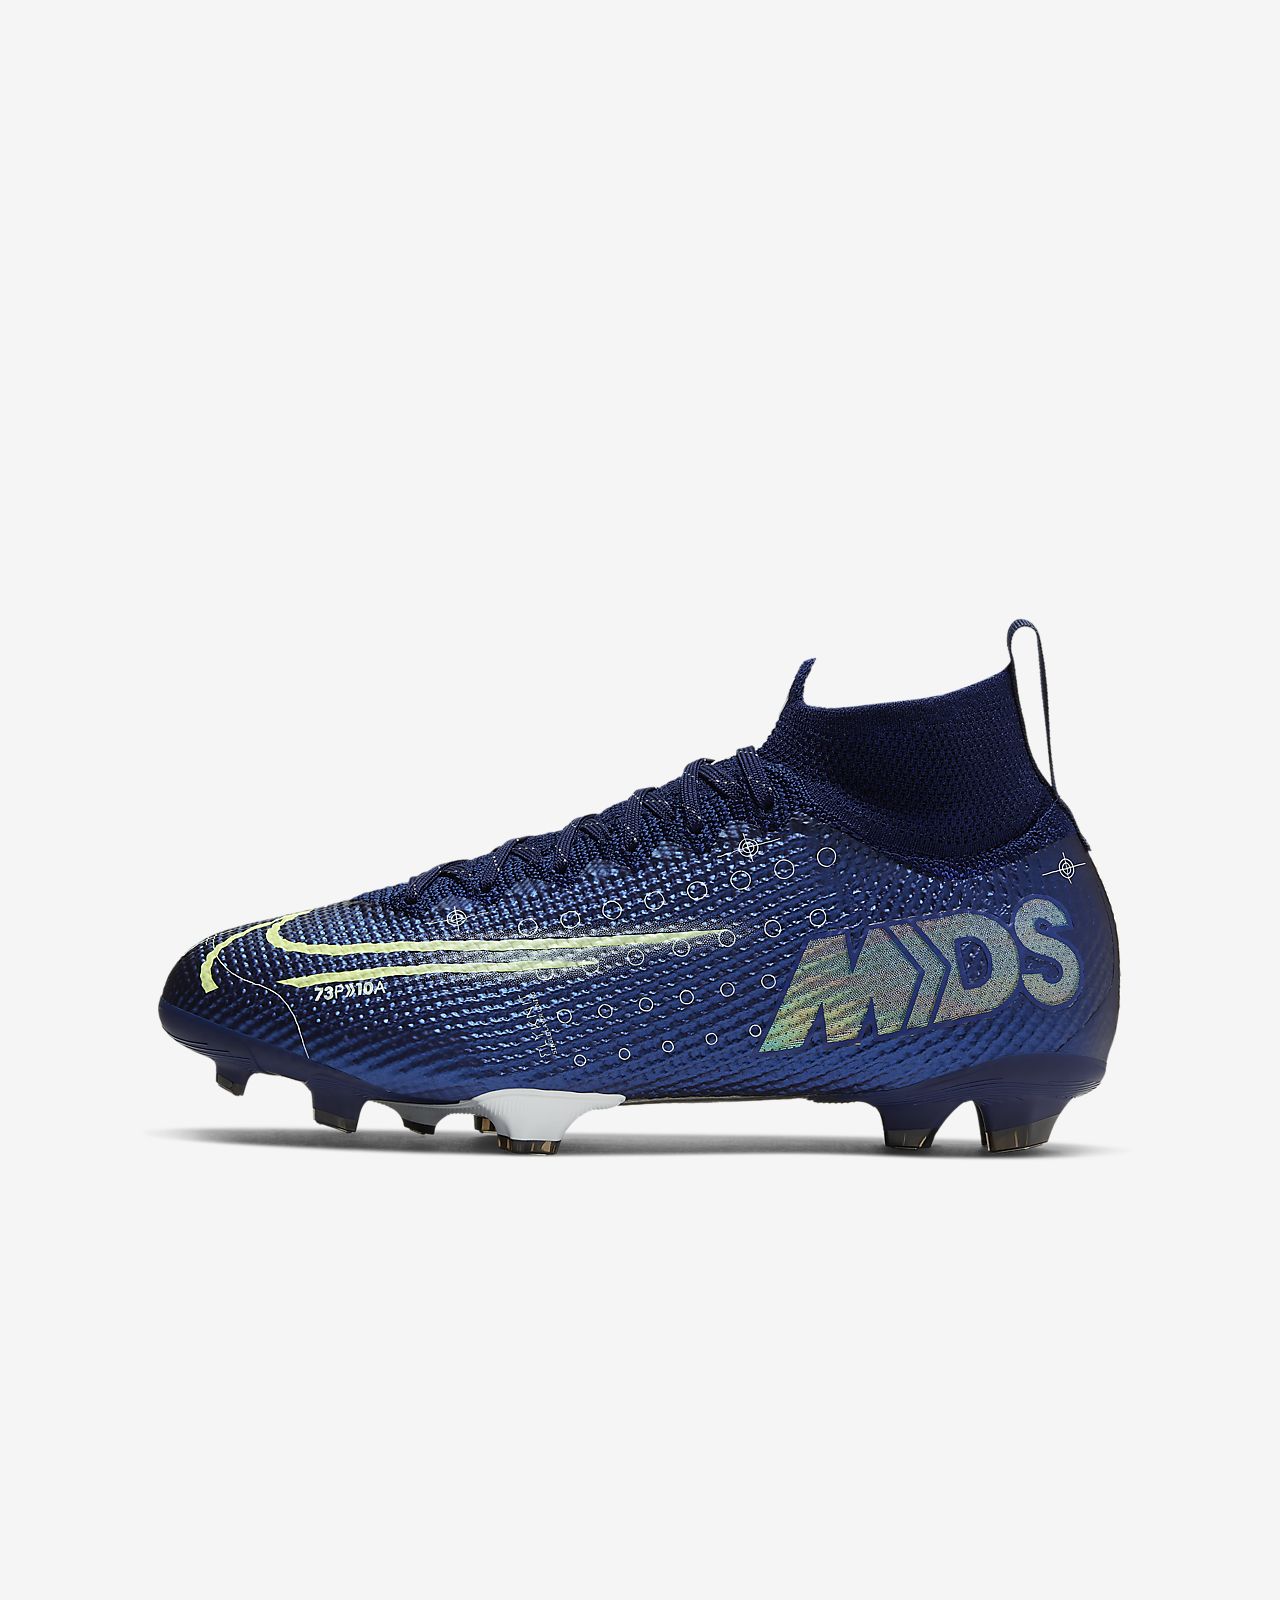 Nike Mercurial Superfly 7 Elite TF Football Boots.